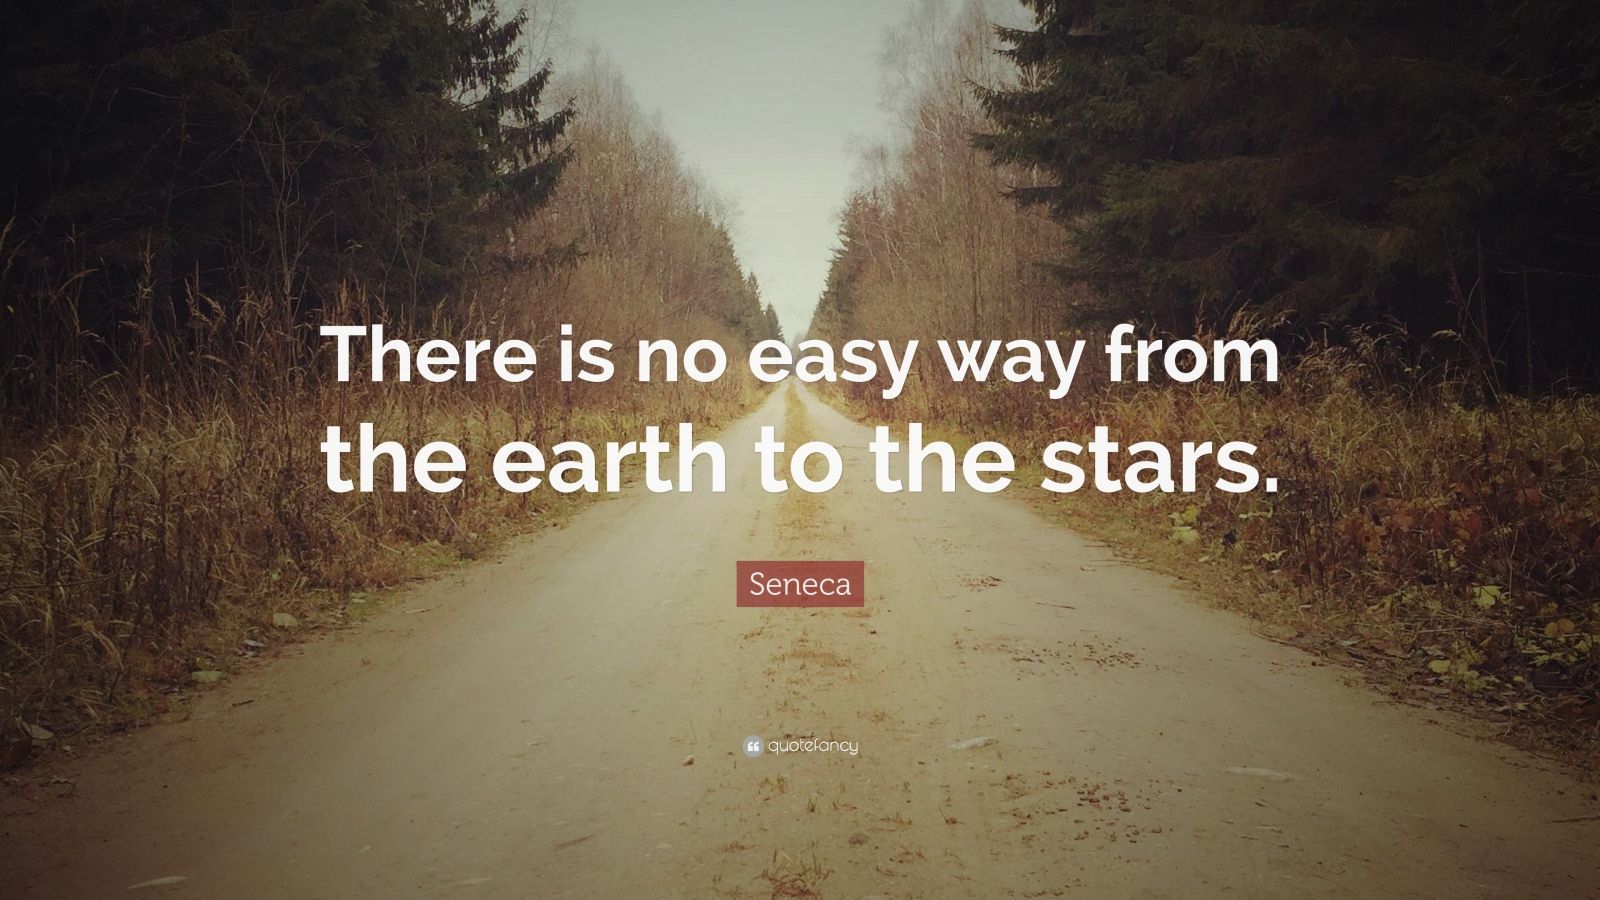 1711984 Seneca Quote There is no easy way from the earth to the stars